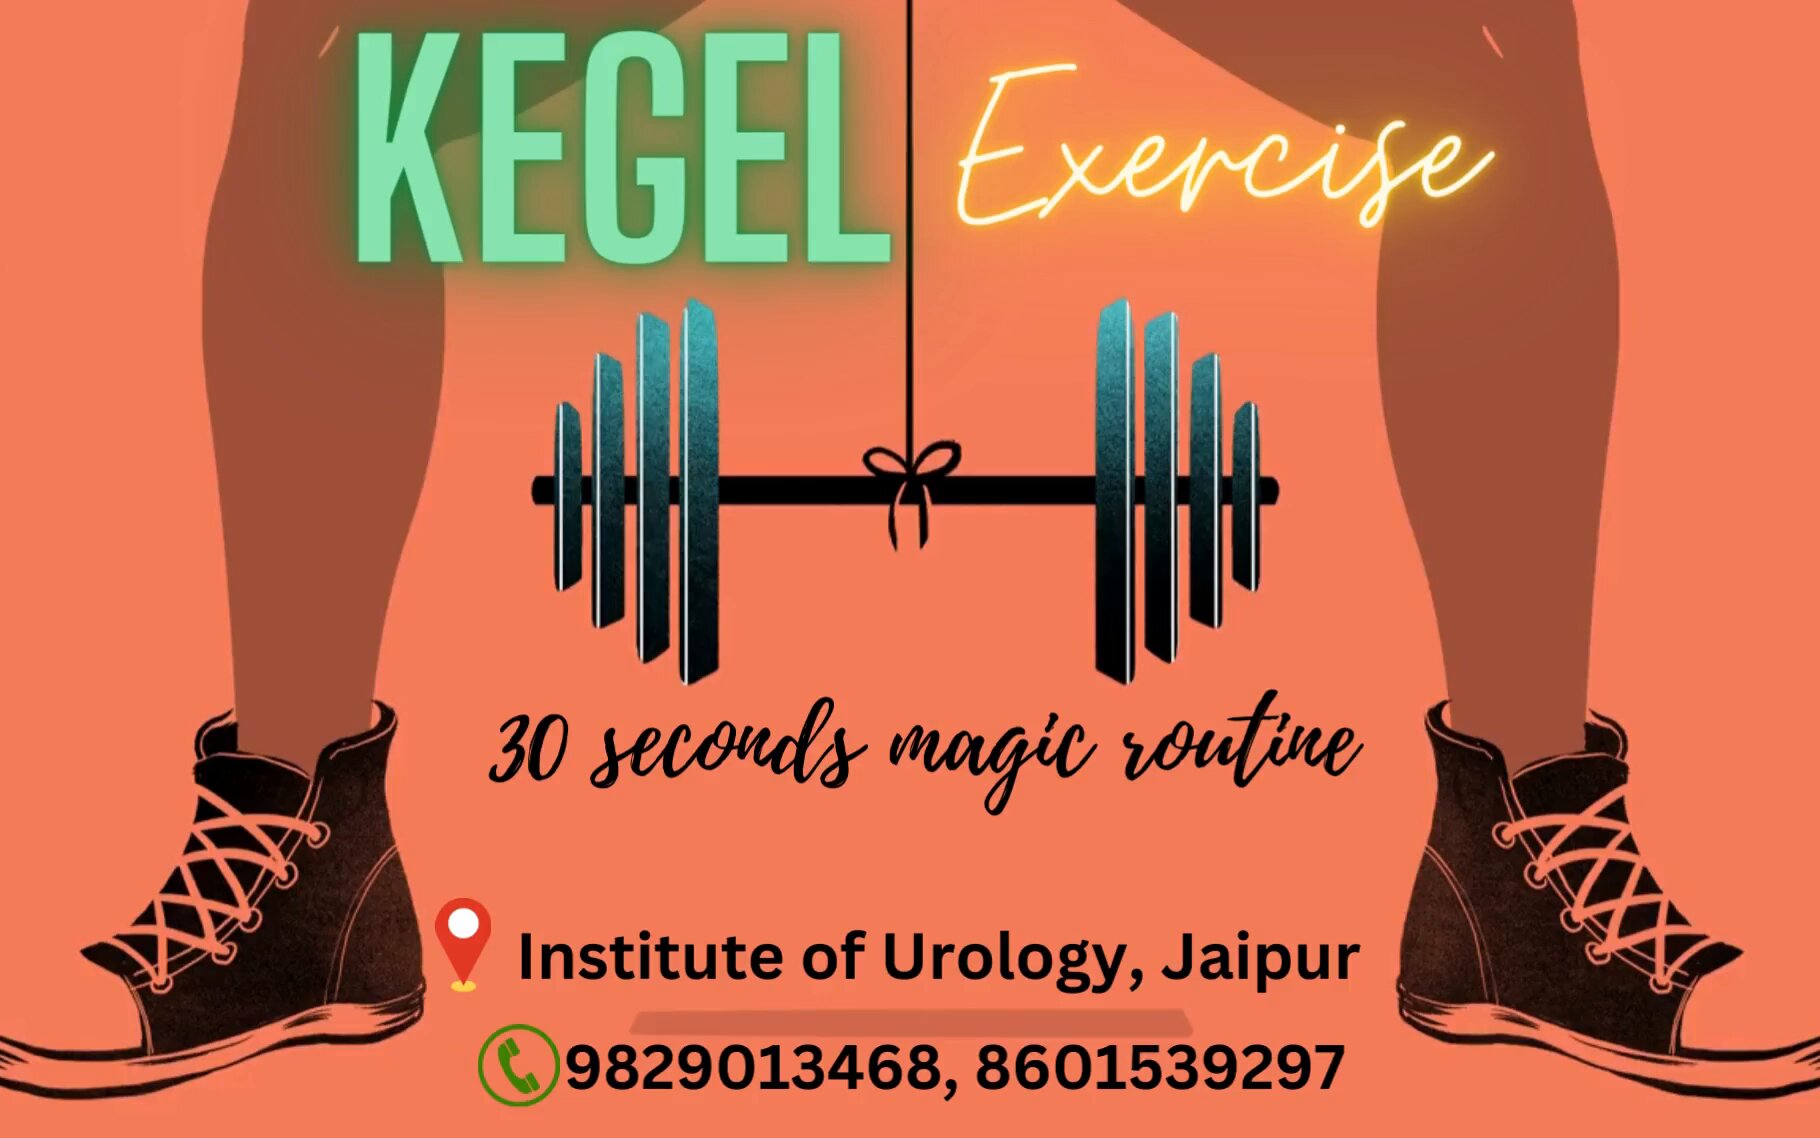 Kegel's Exercise - The 30 seconds magic routine